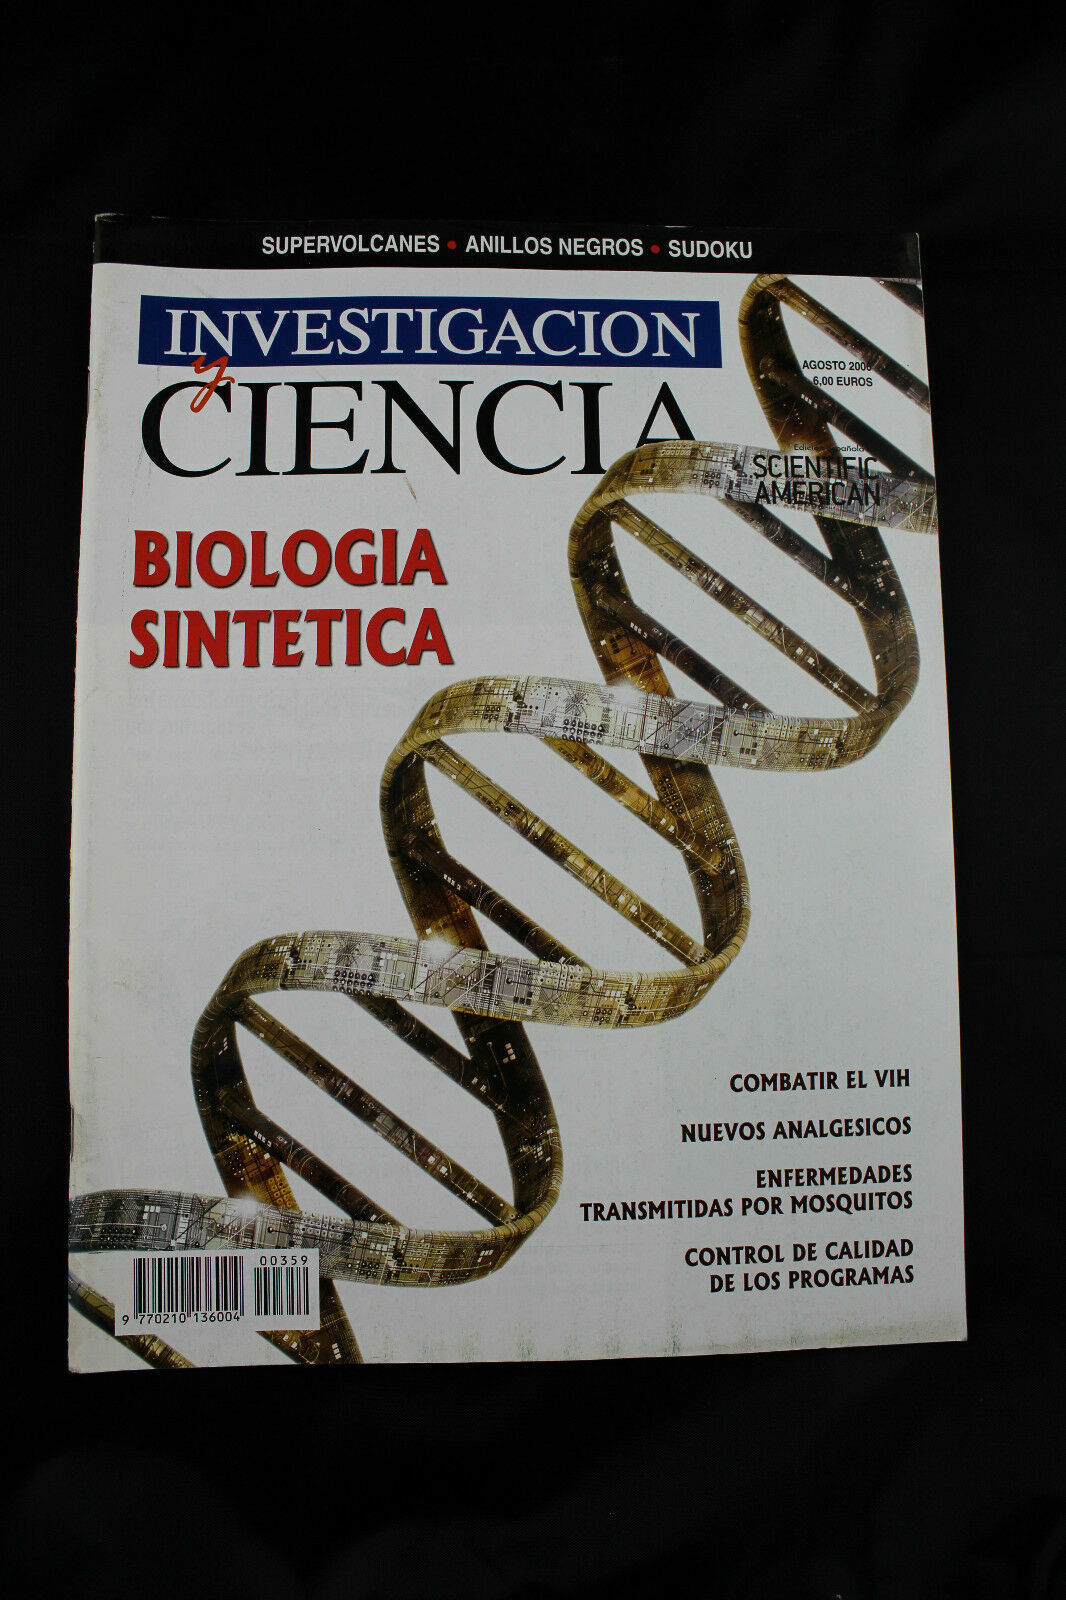 RESEARCH AND SCIENCE Magazine Synthetic Biology - August 2006